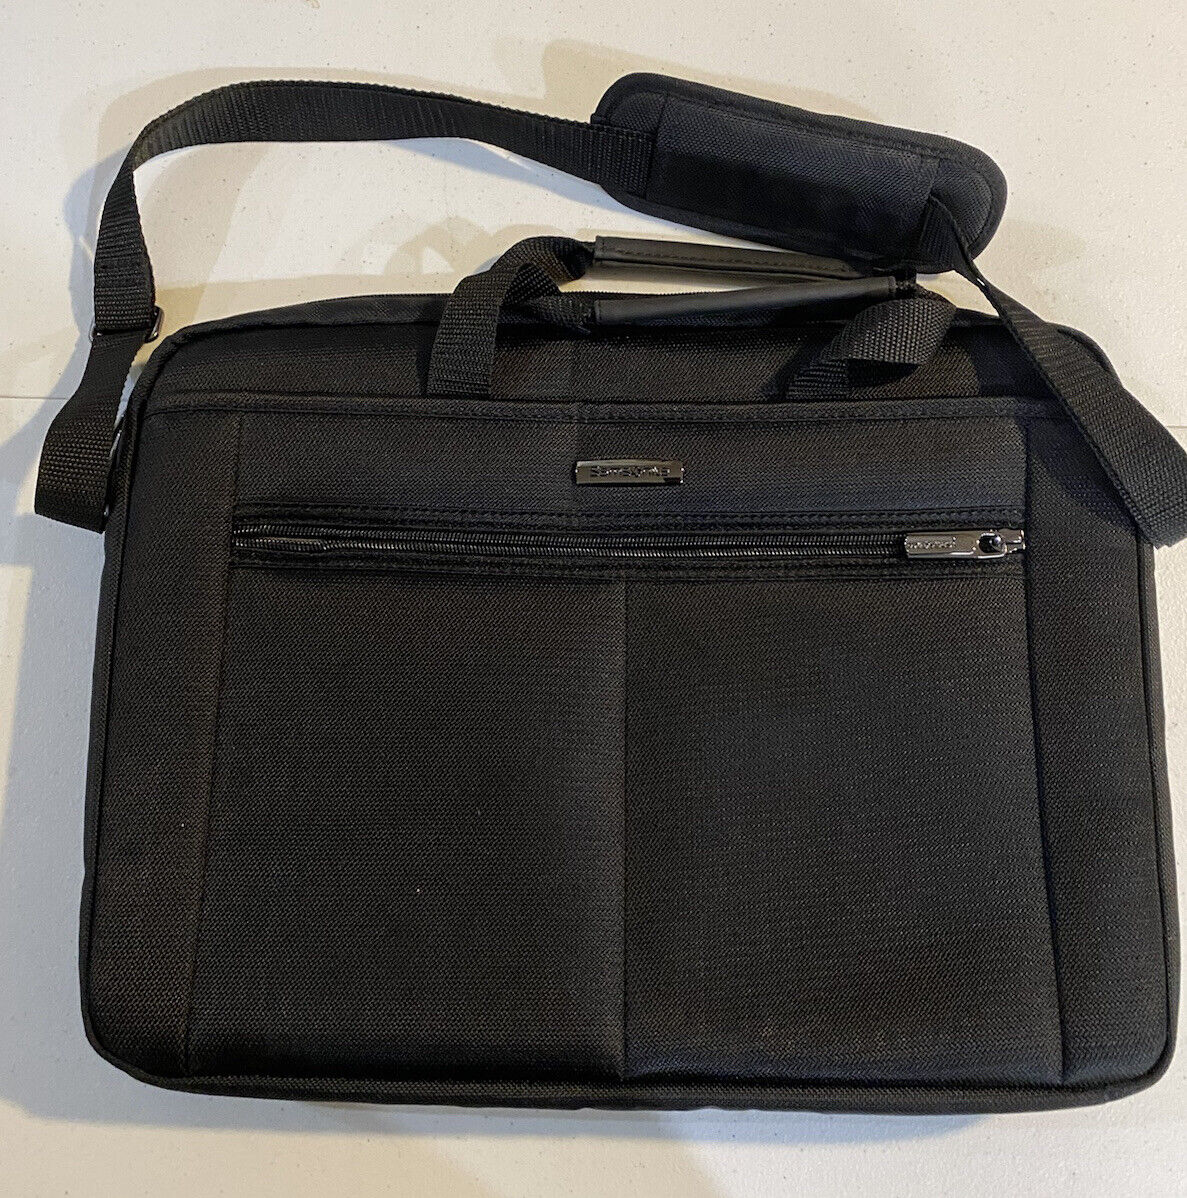 Samsonite Laptop Computer Travel Case Black Bag 15.75x12x2  New Without Tags